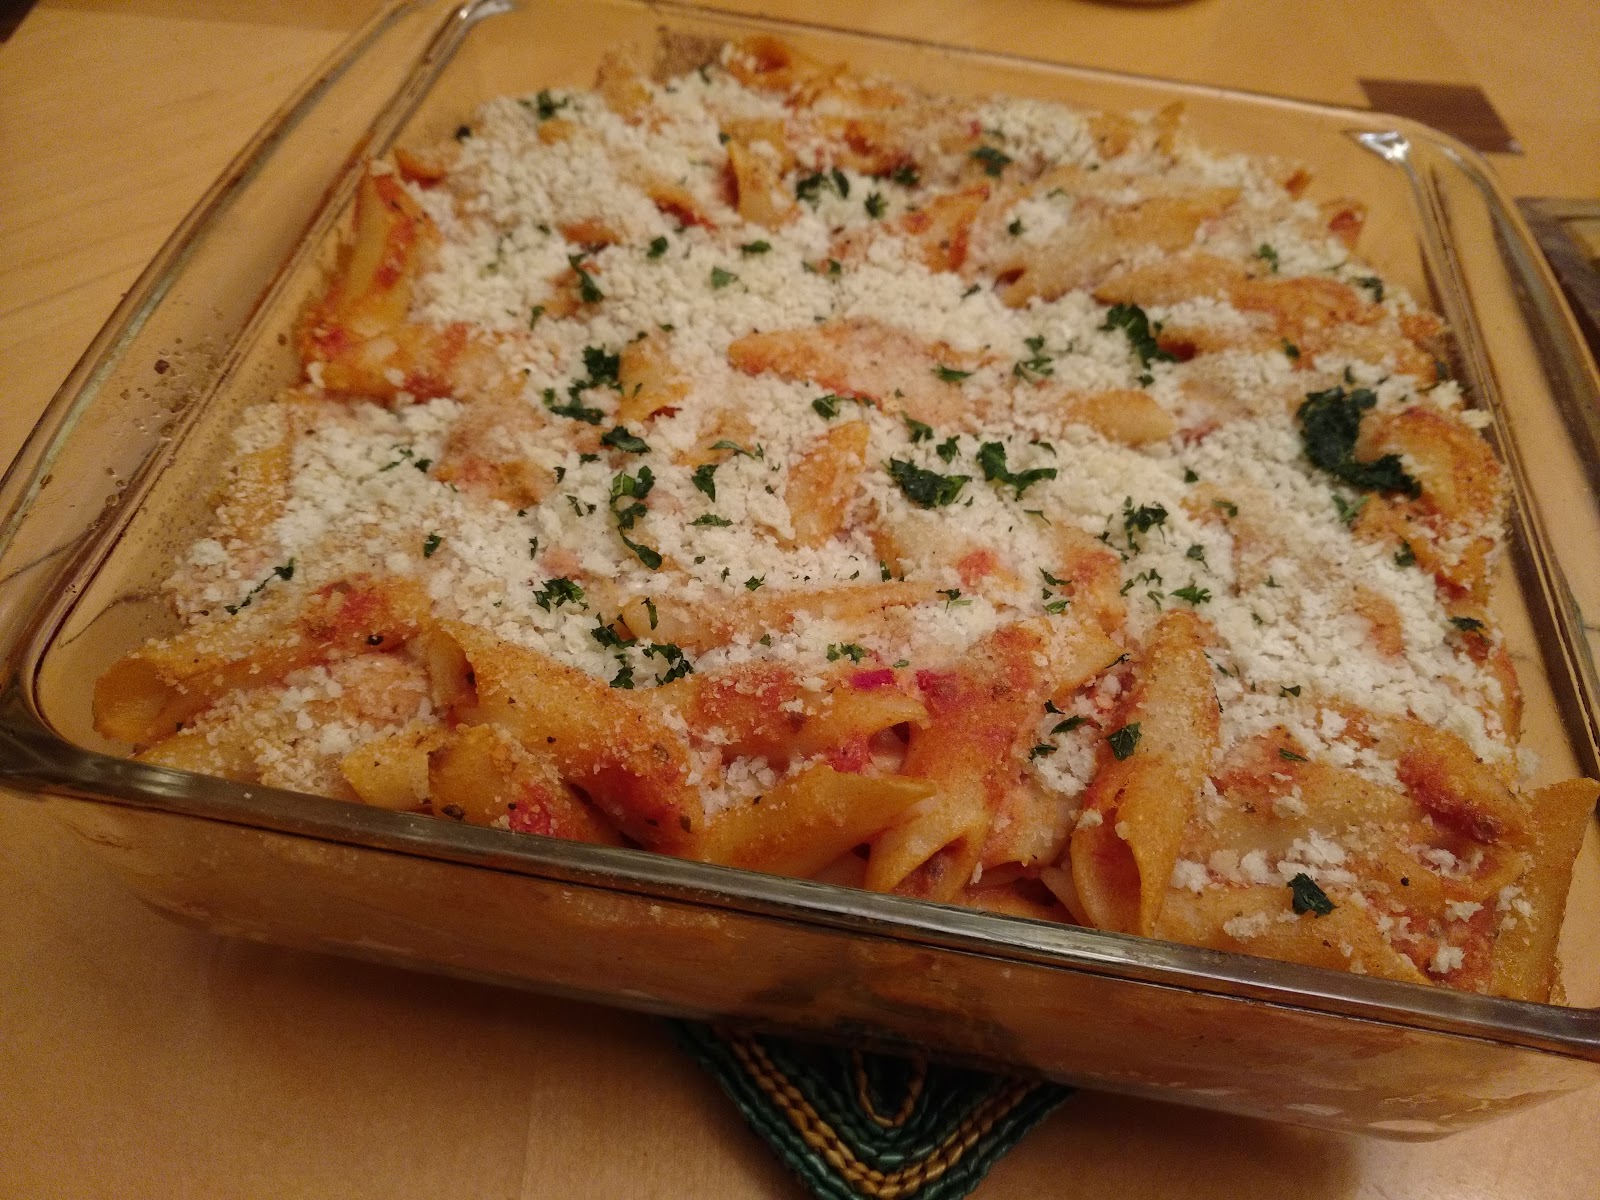 &amp;quot;So what are you making for dinner?&amp;quot;: Baked Ziti with Pork Rib Guazzetto